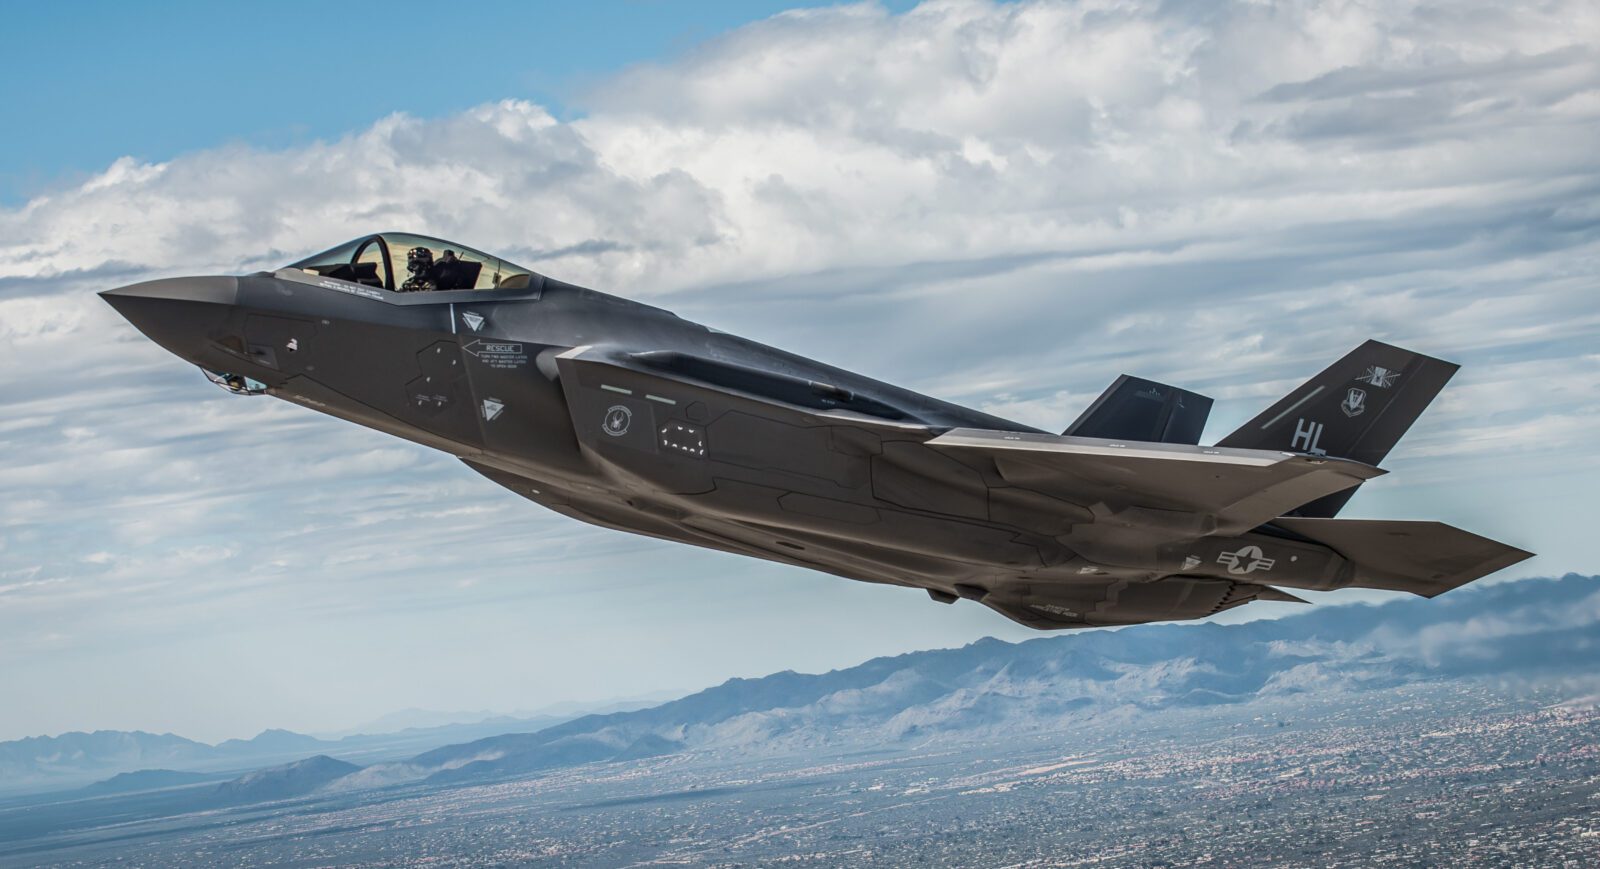 Germany confirms purchase of 35 F-35 fighter jets from the US